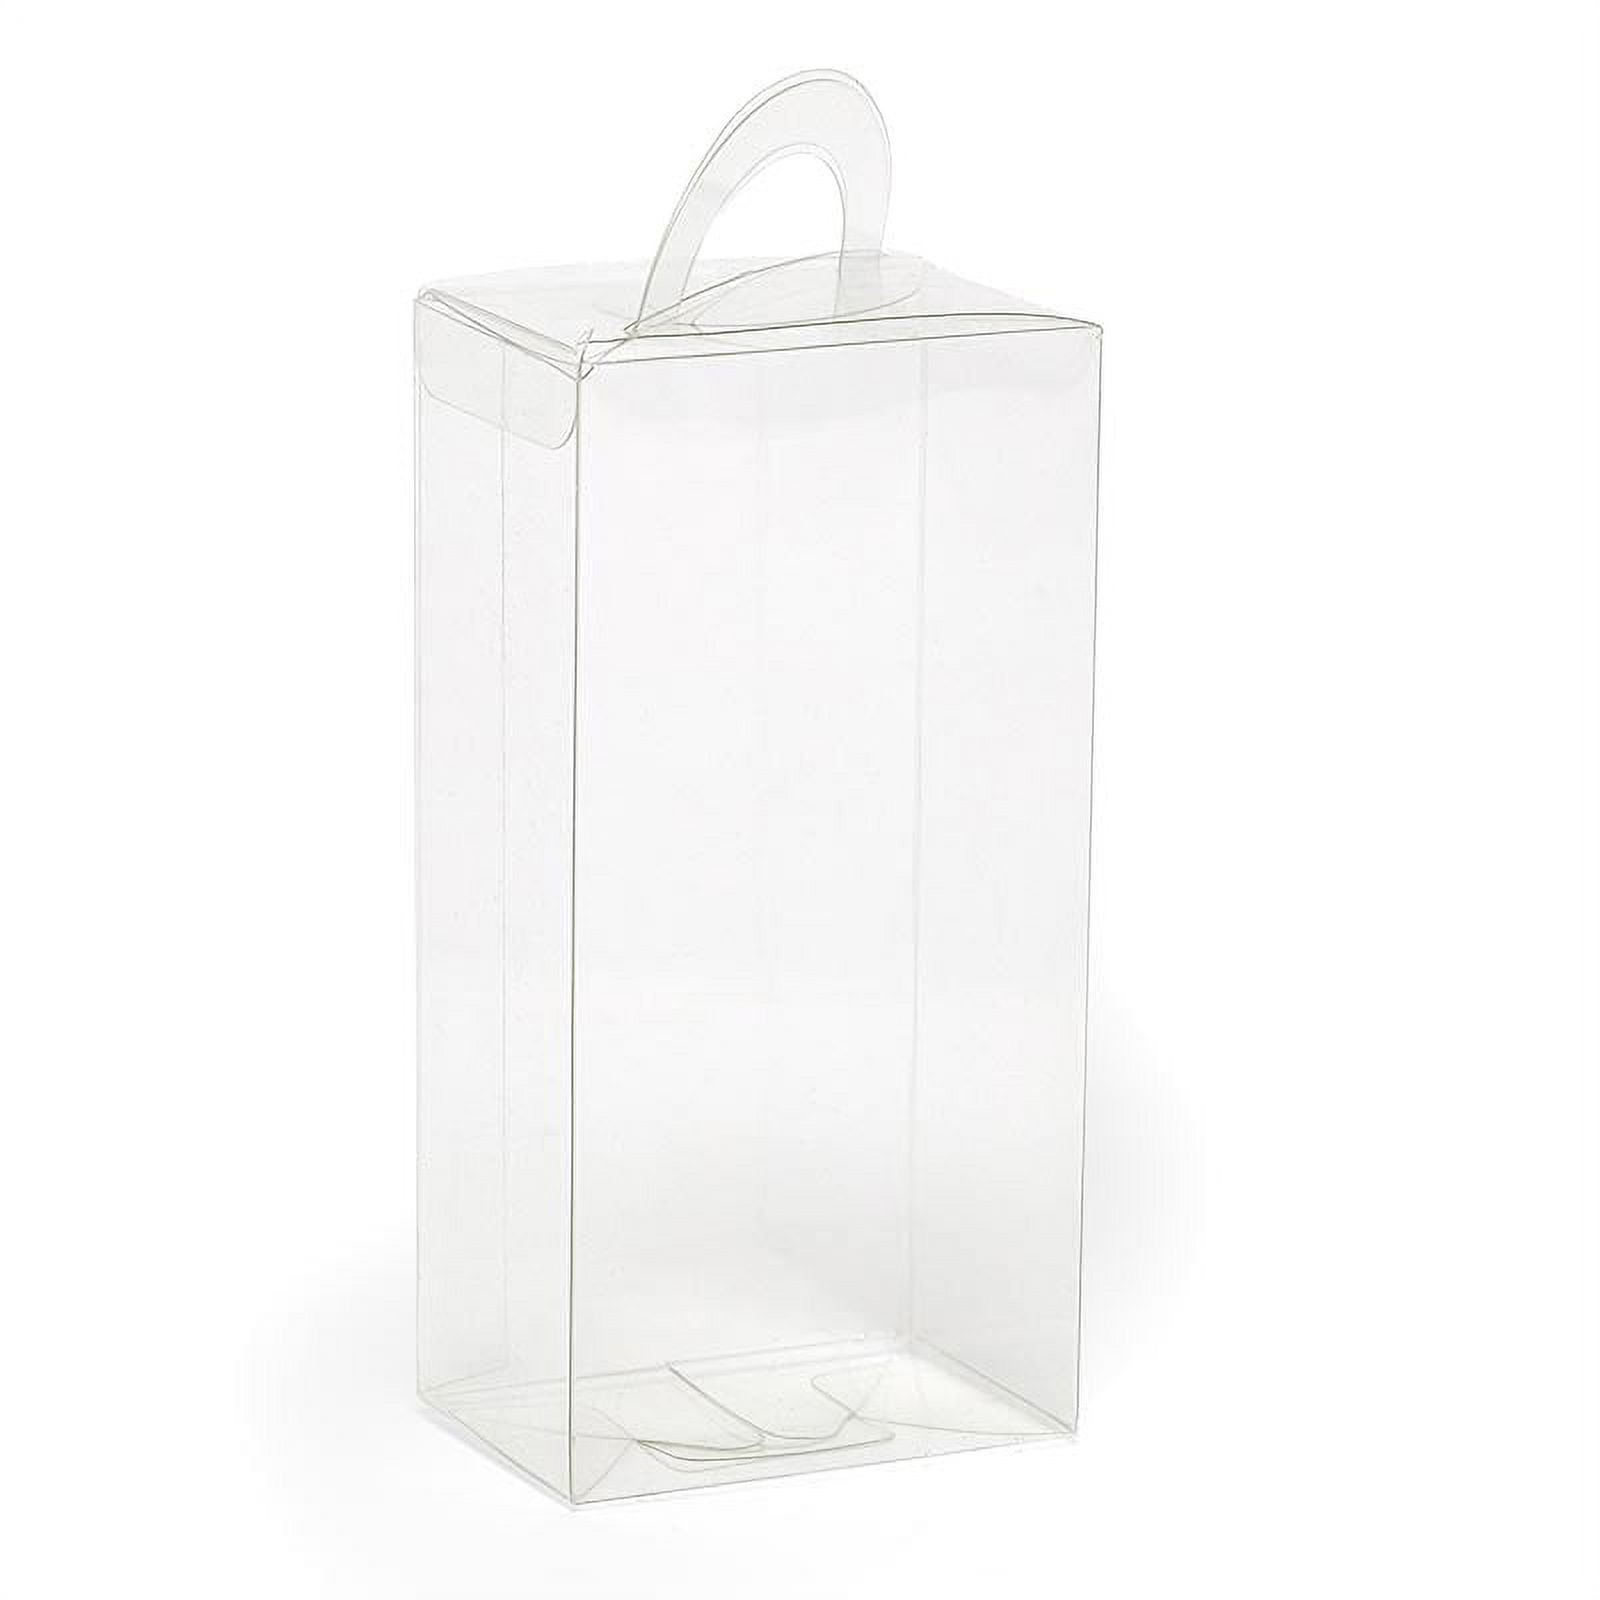 Clear PVC Tuck Top Boxes 2 inch x 2 inch x 4 inch | Quantity: 50 by Paper Mart